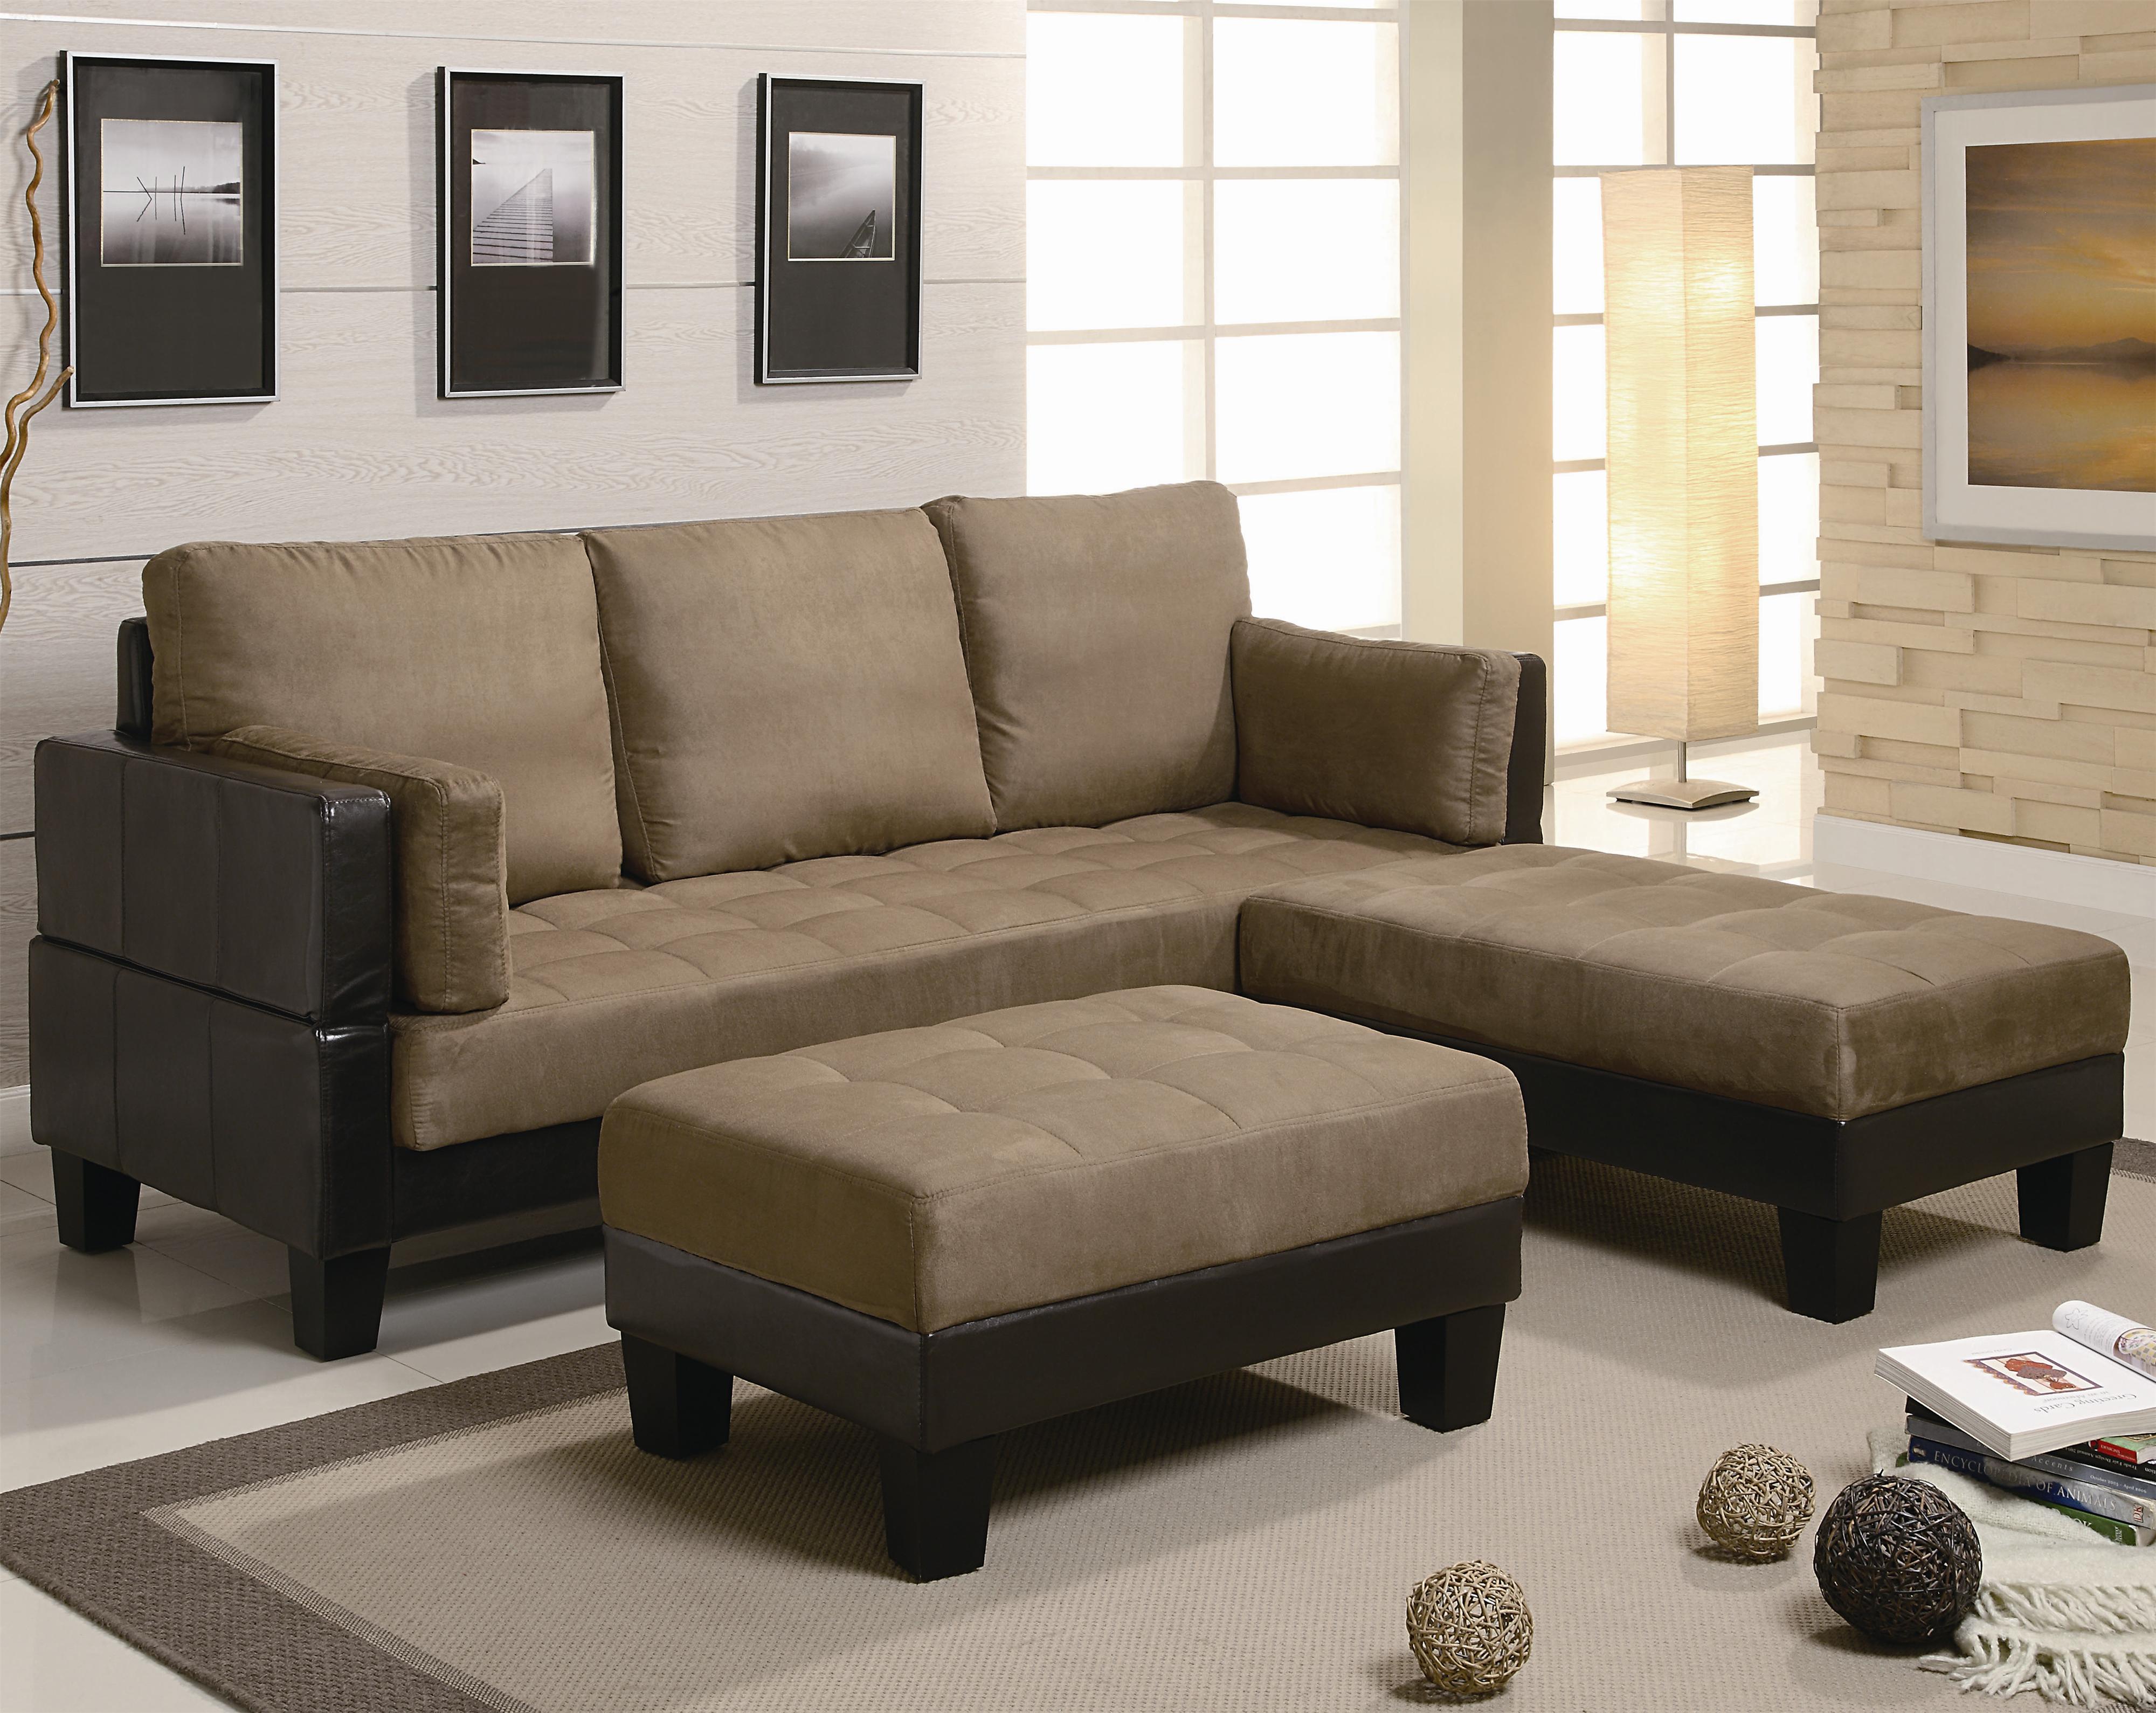 Ellesmere Contemporary Microfiber Sofa Bed Group With 2 Ottomans